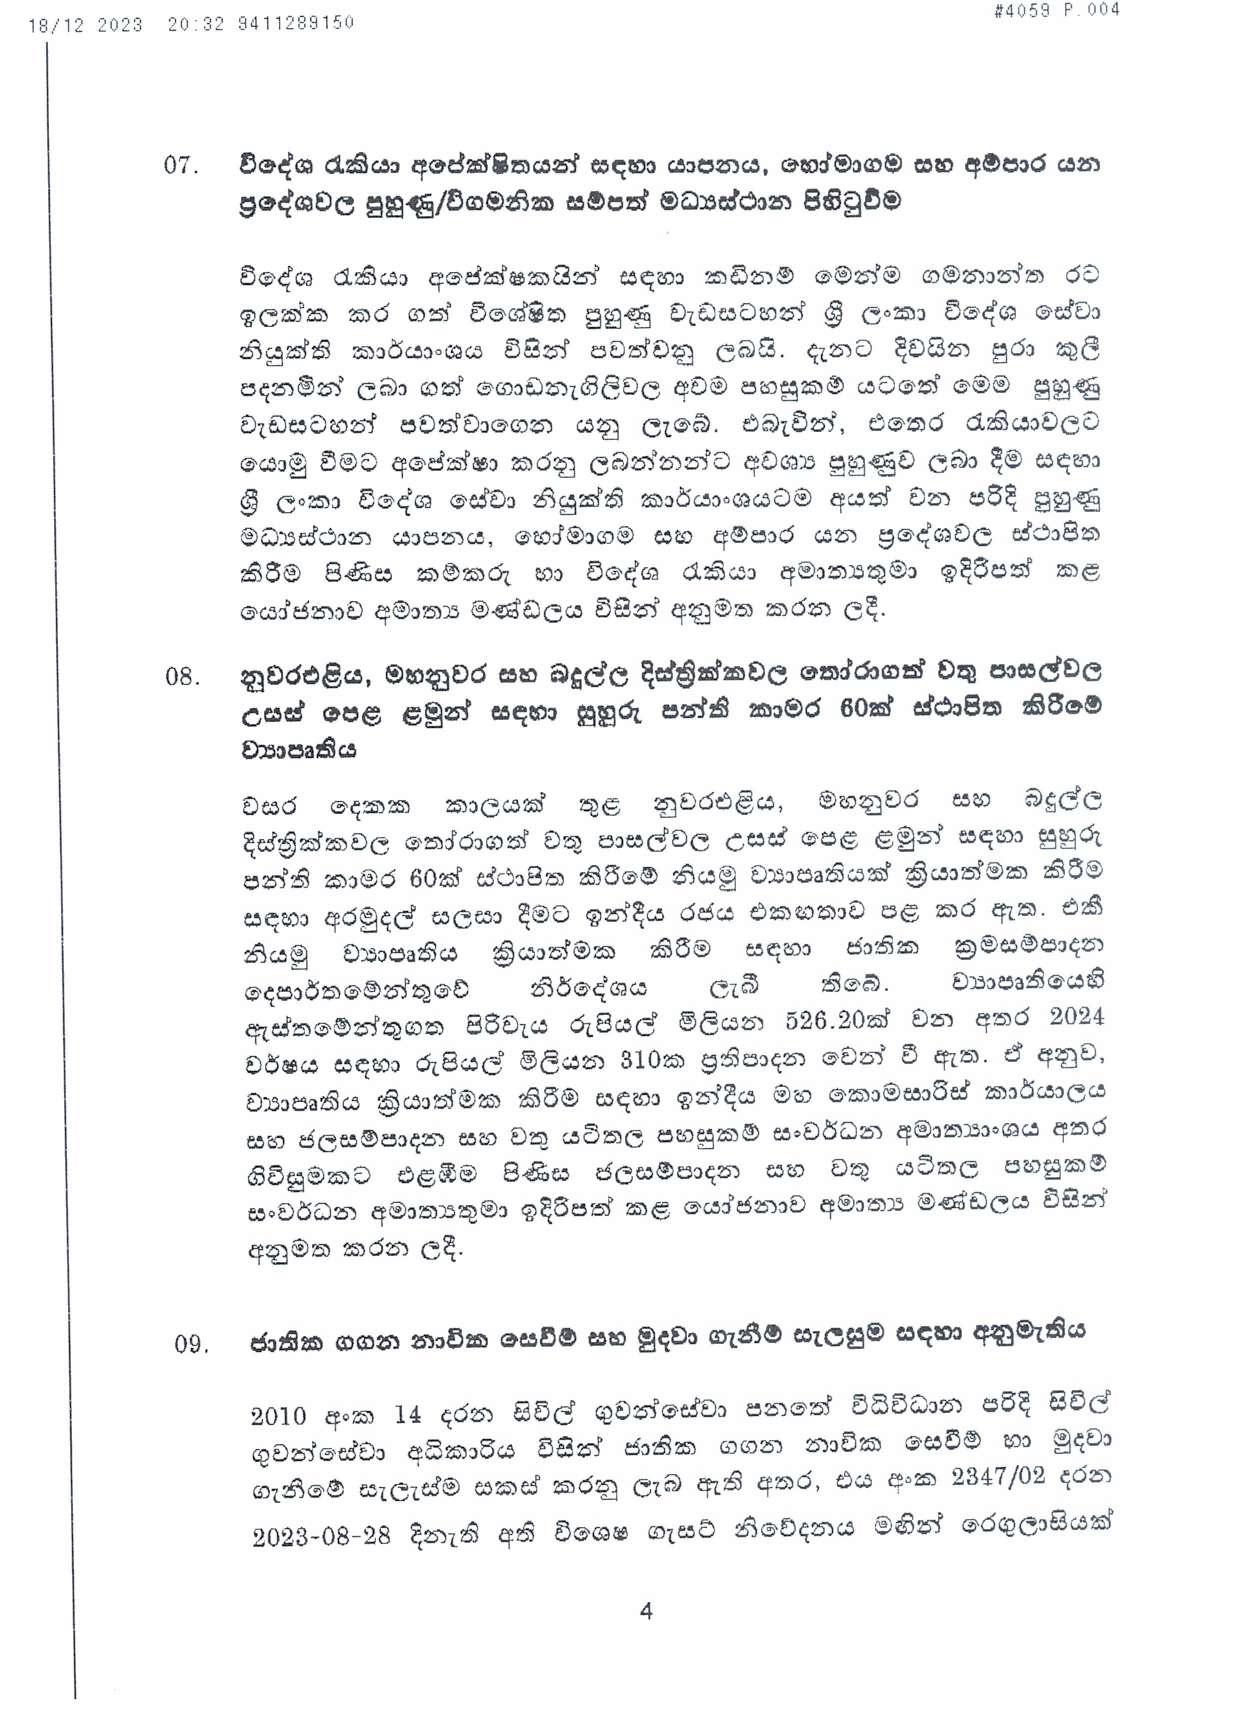 Cabinet Decision on 18.12.2023 page 004